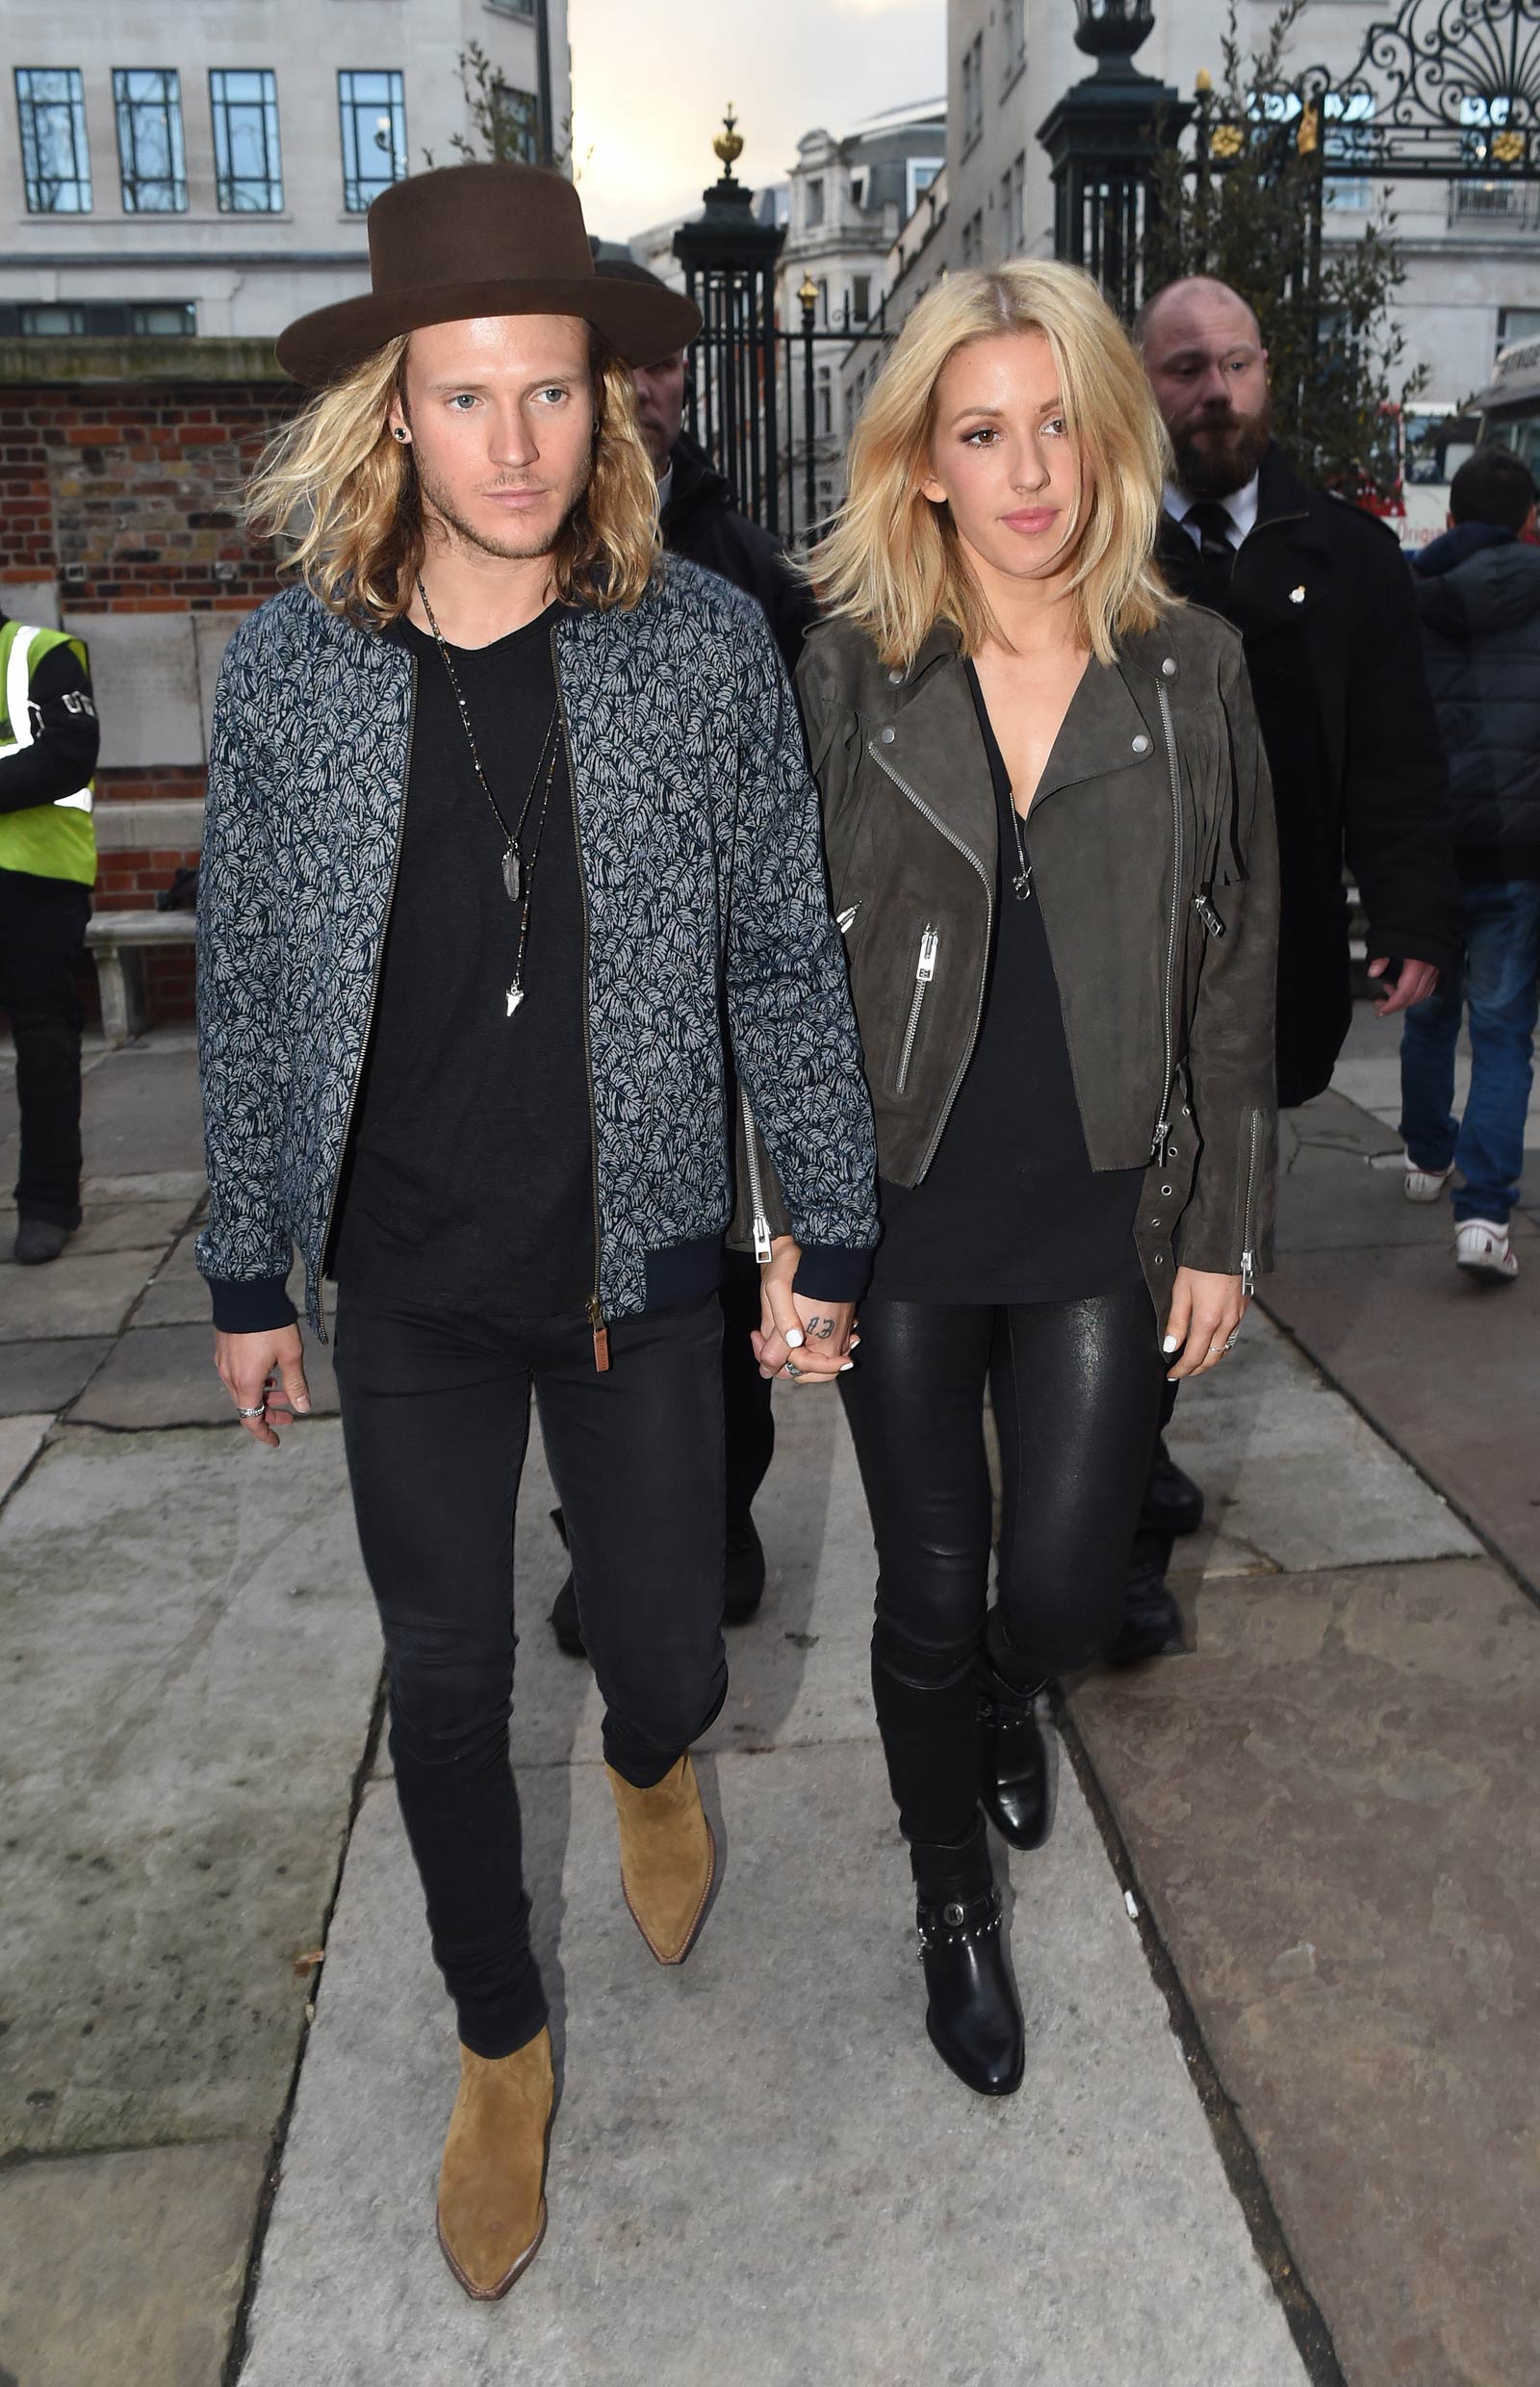 Ellie Goulding heading to a private gig in London